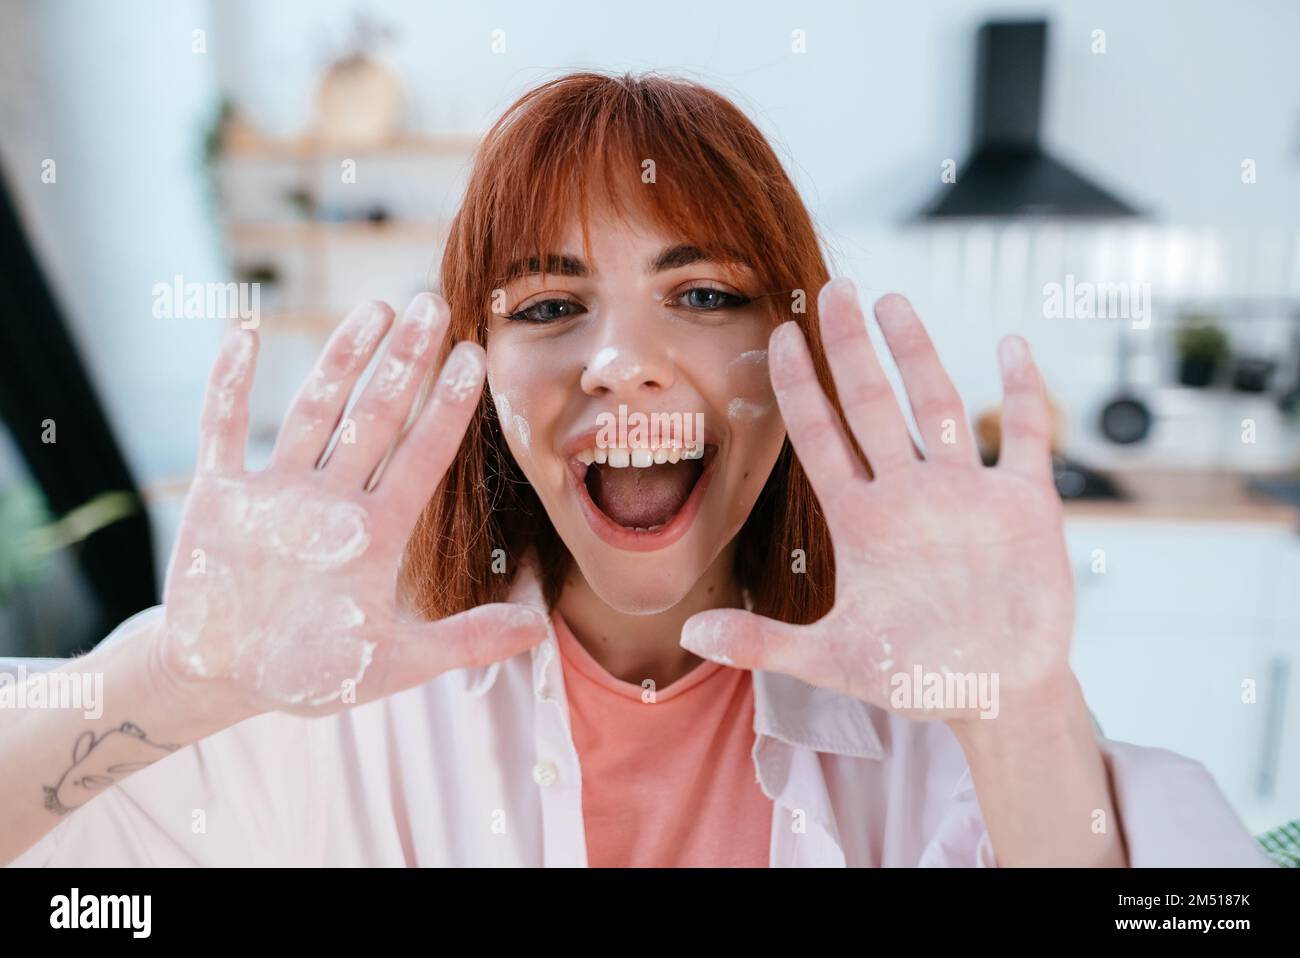 Young woman shows her hands in flour in the kitchen Stock Photo